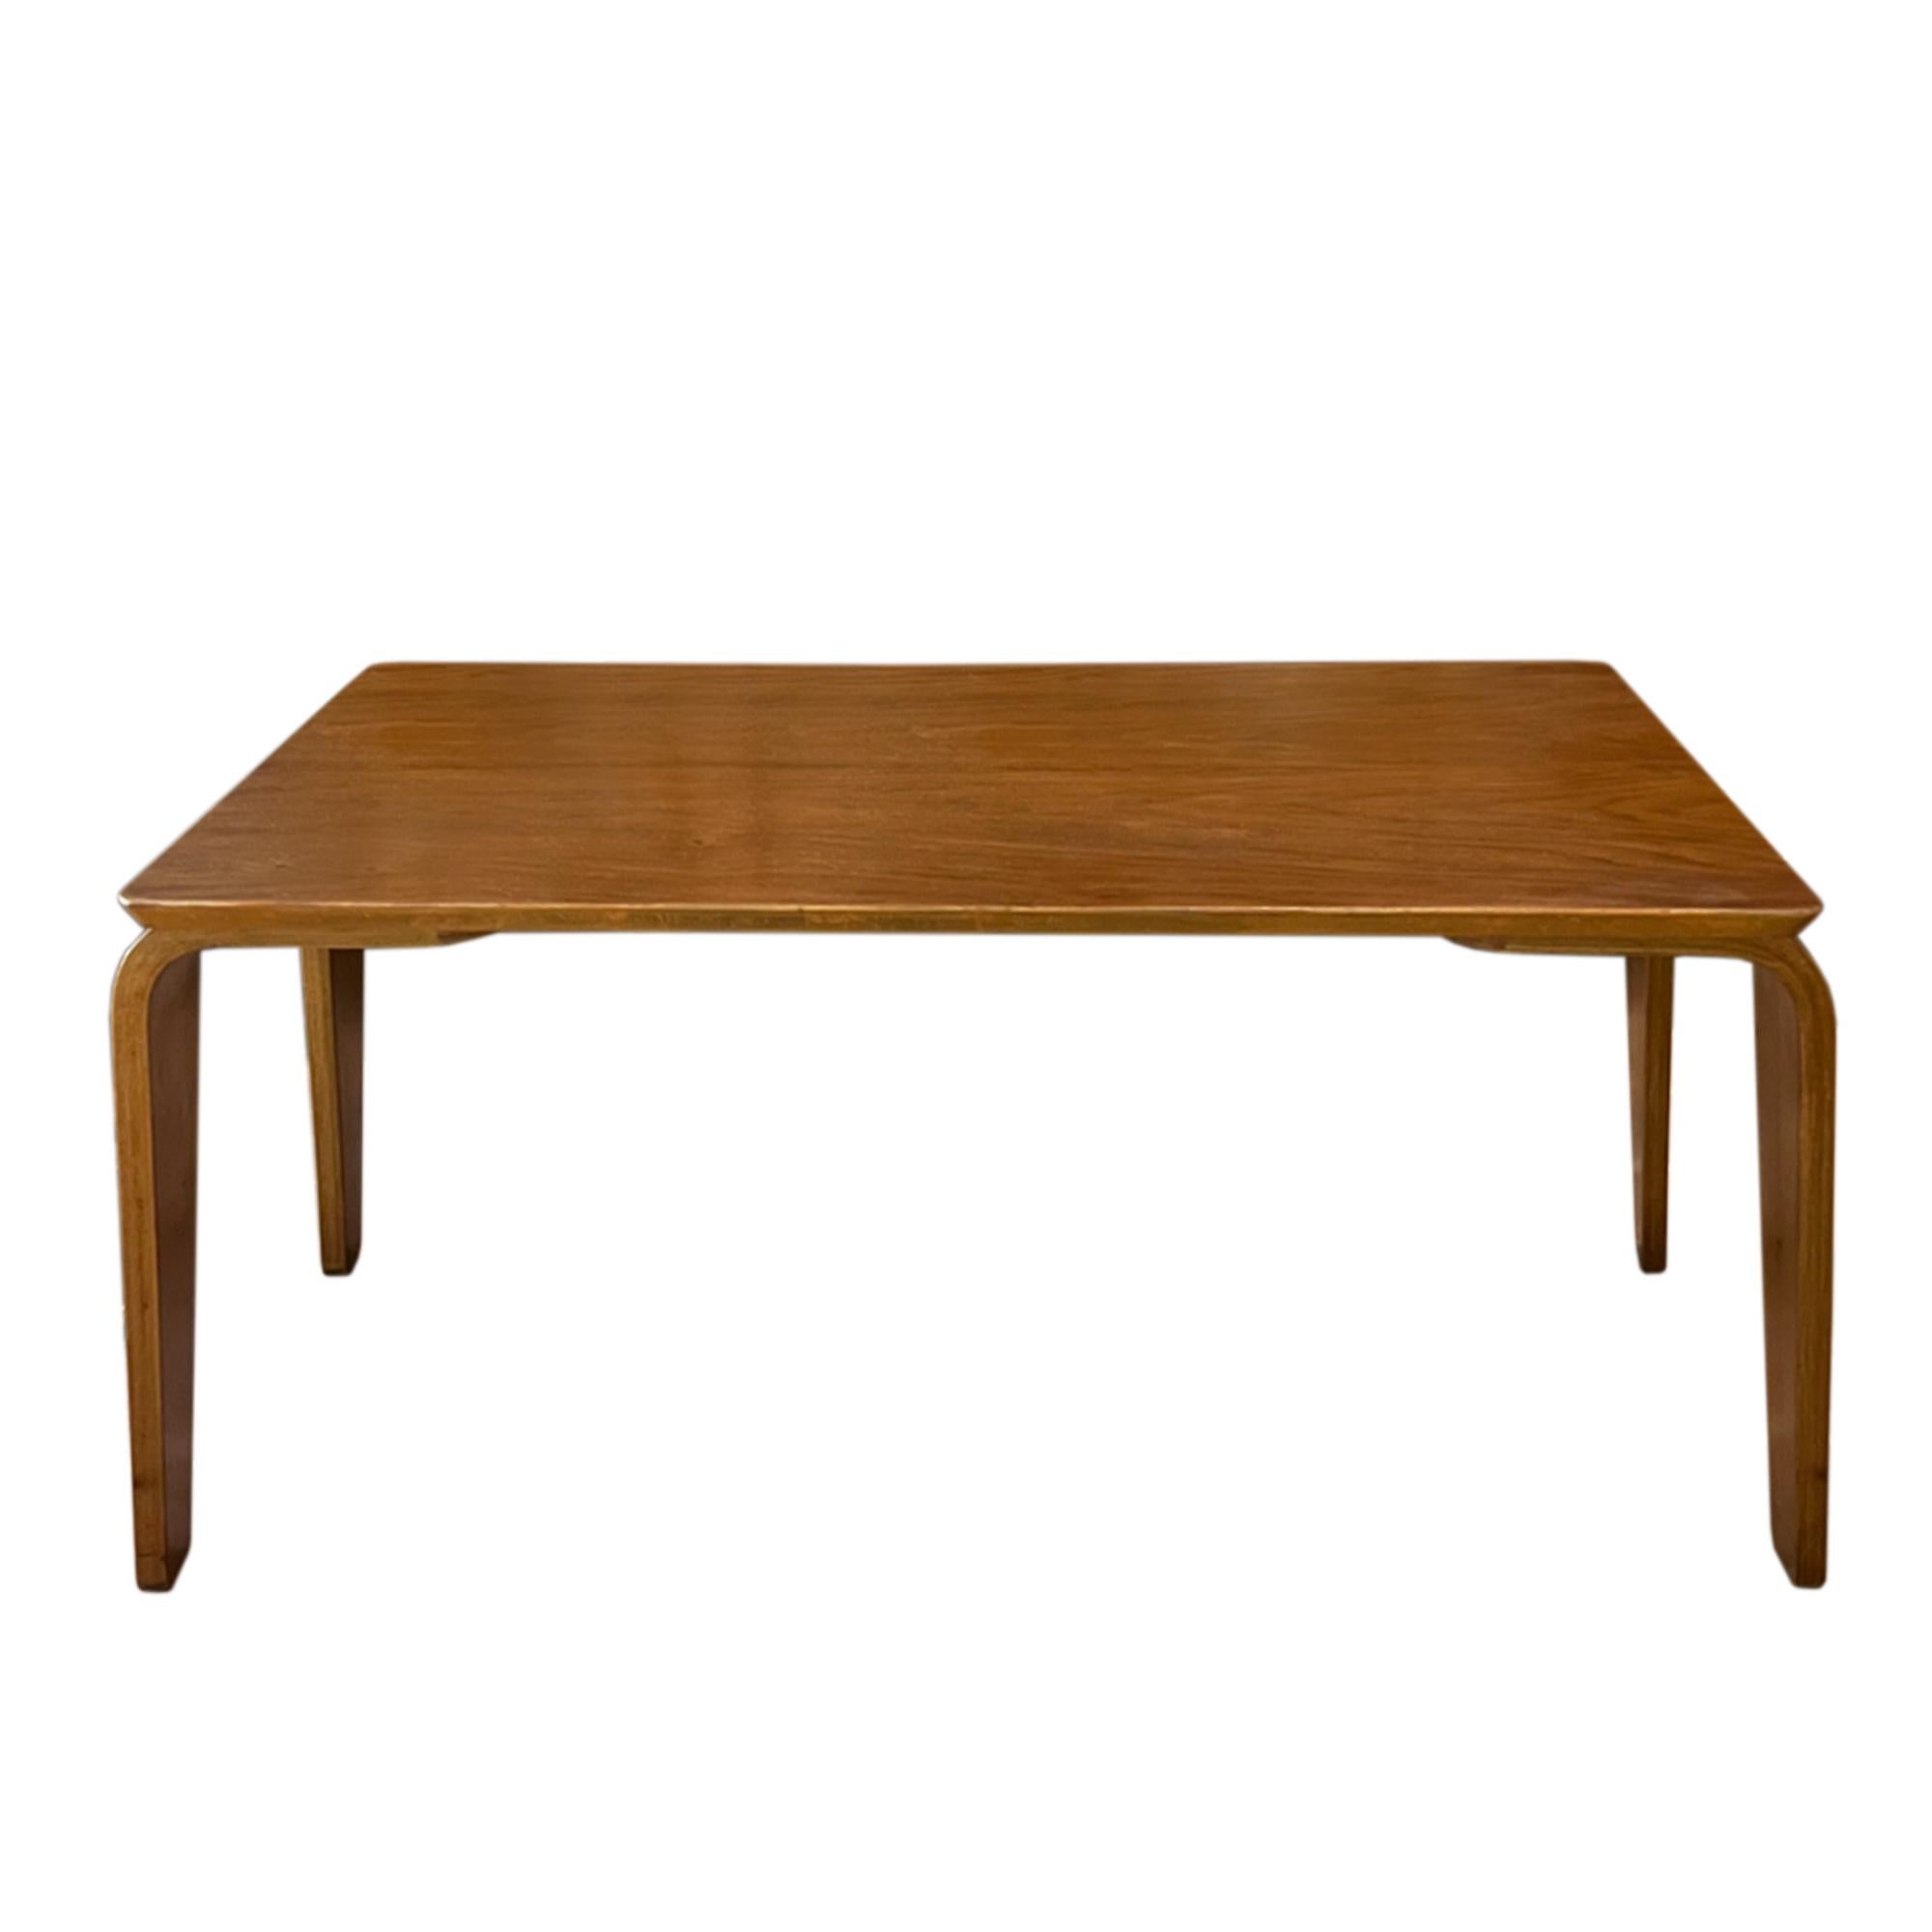 A good sized, super stylish coffee table made in Britain in the 1940s. 

Designed by Eric Lyons (British, 1912 - 1980) it's crafted from elm veneered bent ply, with a rectangular top and tapered legs.

The maker's stamp is retained on the